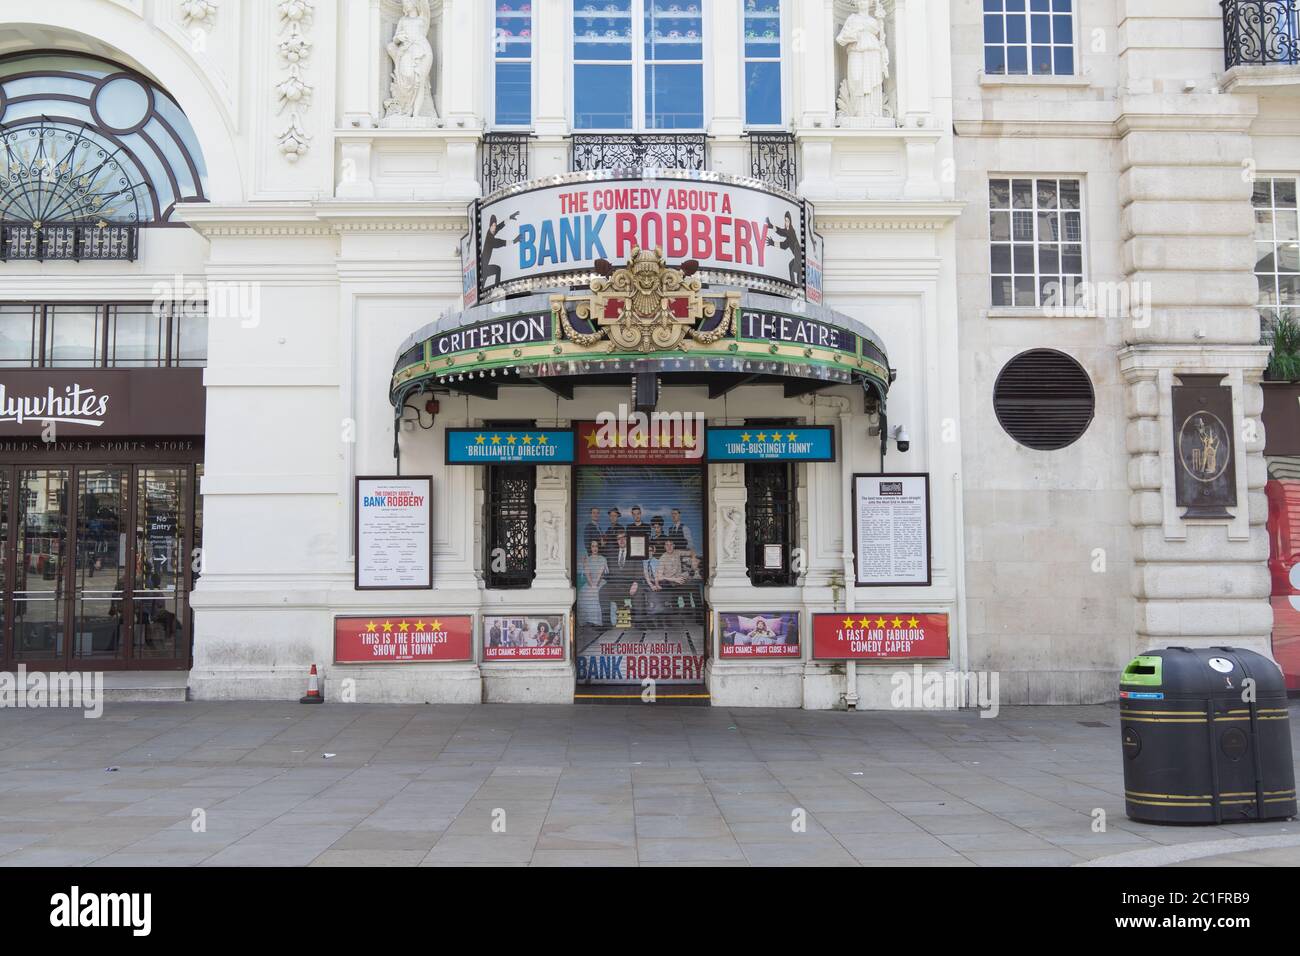 Criterion Theatre in Piccadilly showing The Comedy About a Bank Robbery.  London Stock Photo